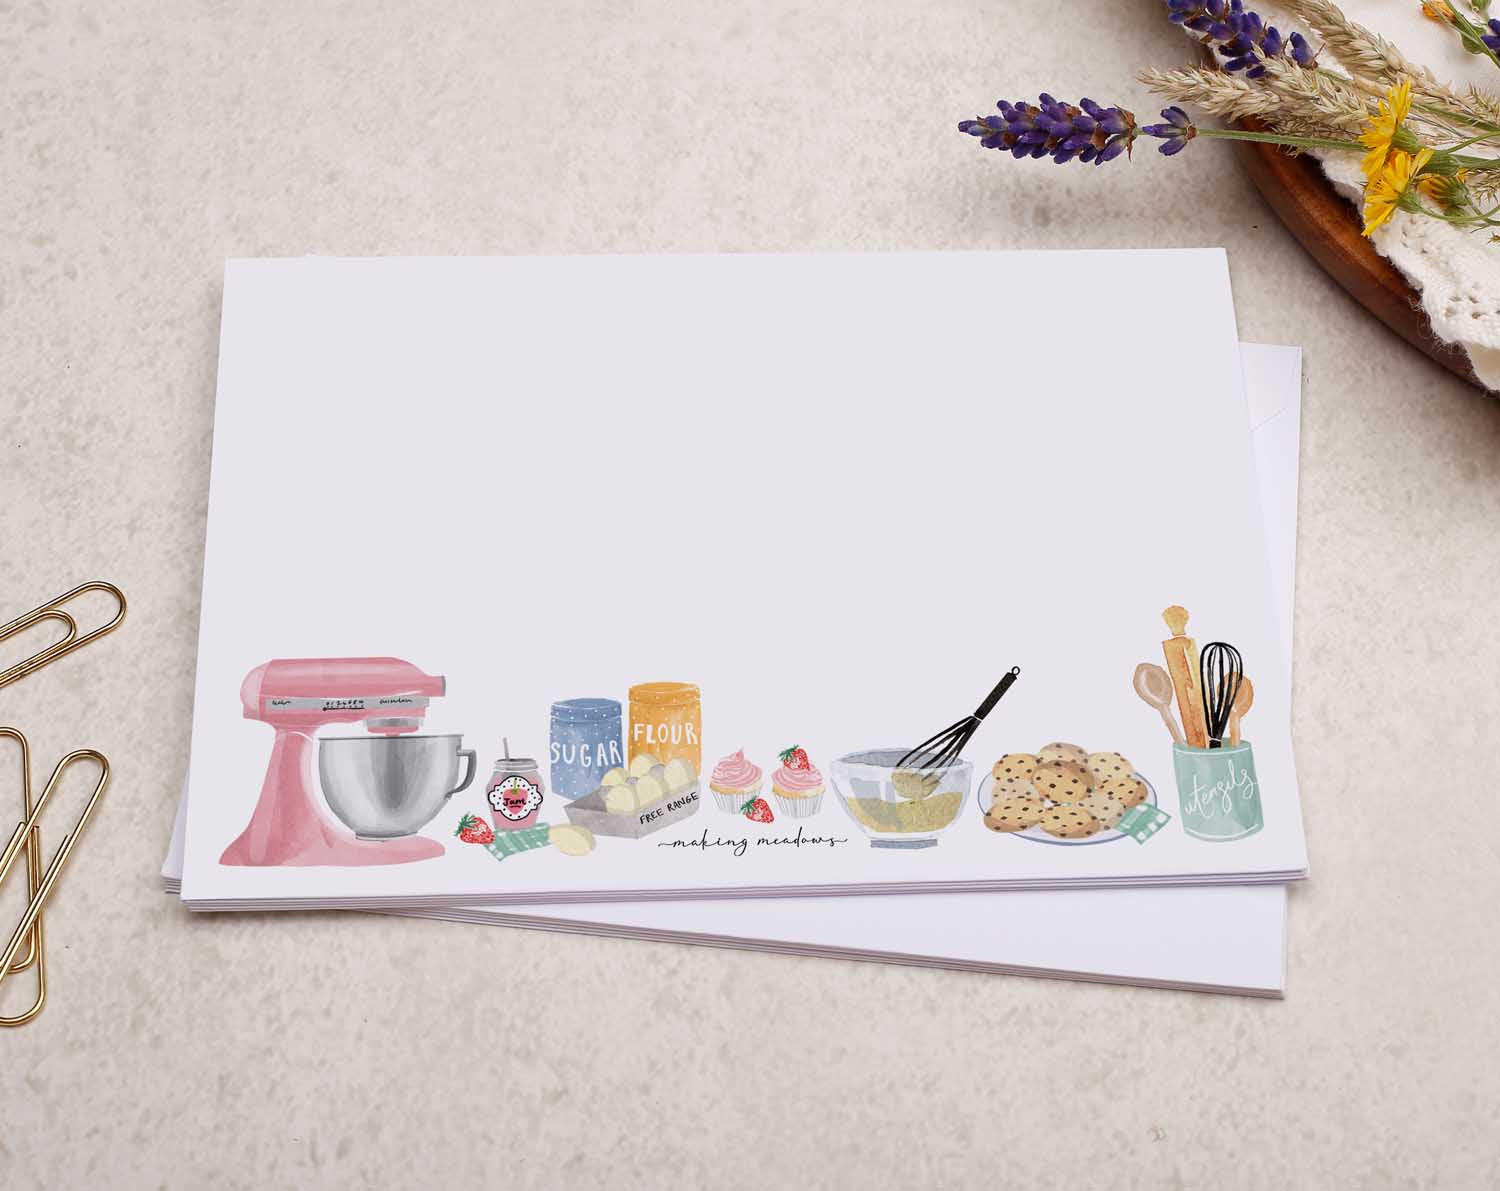 A pretty decorated C6 white envelope with a Pretty Cake Baking, Star Baker Design. 